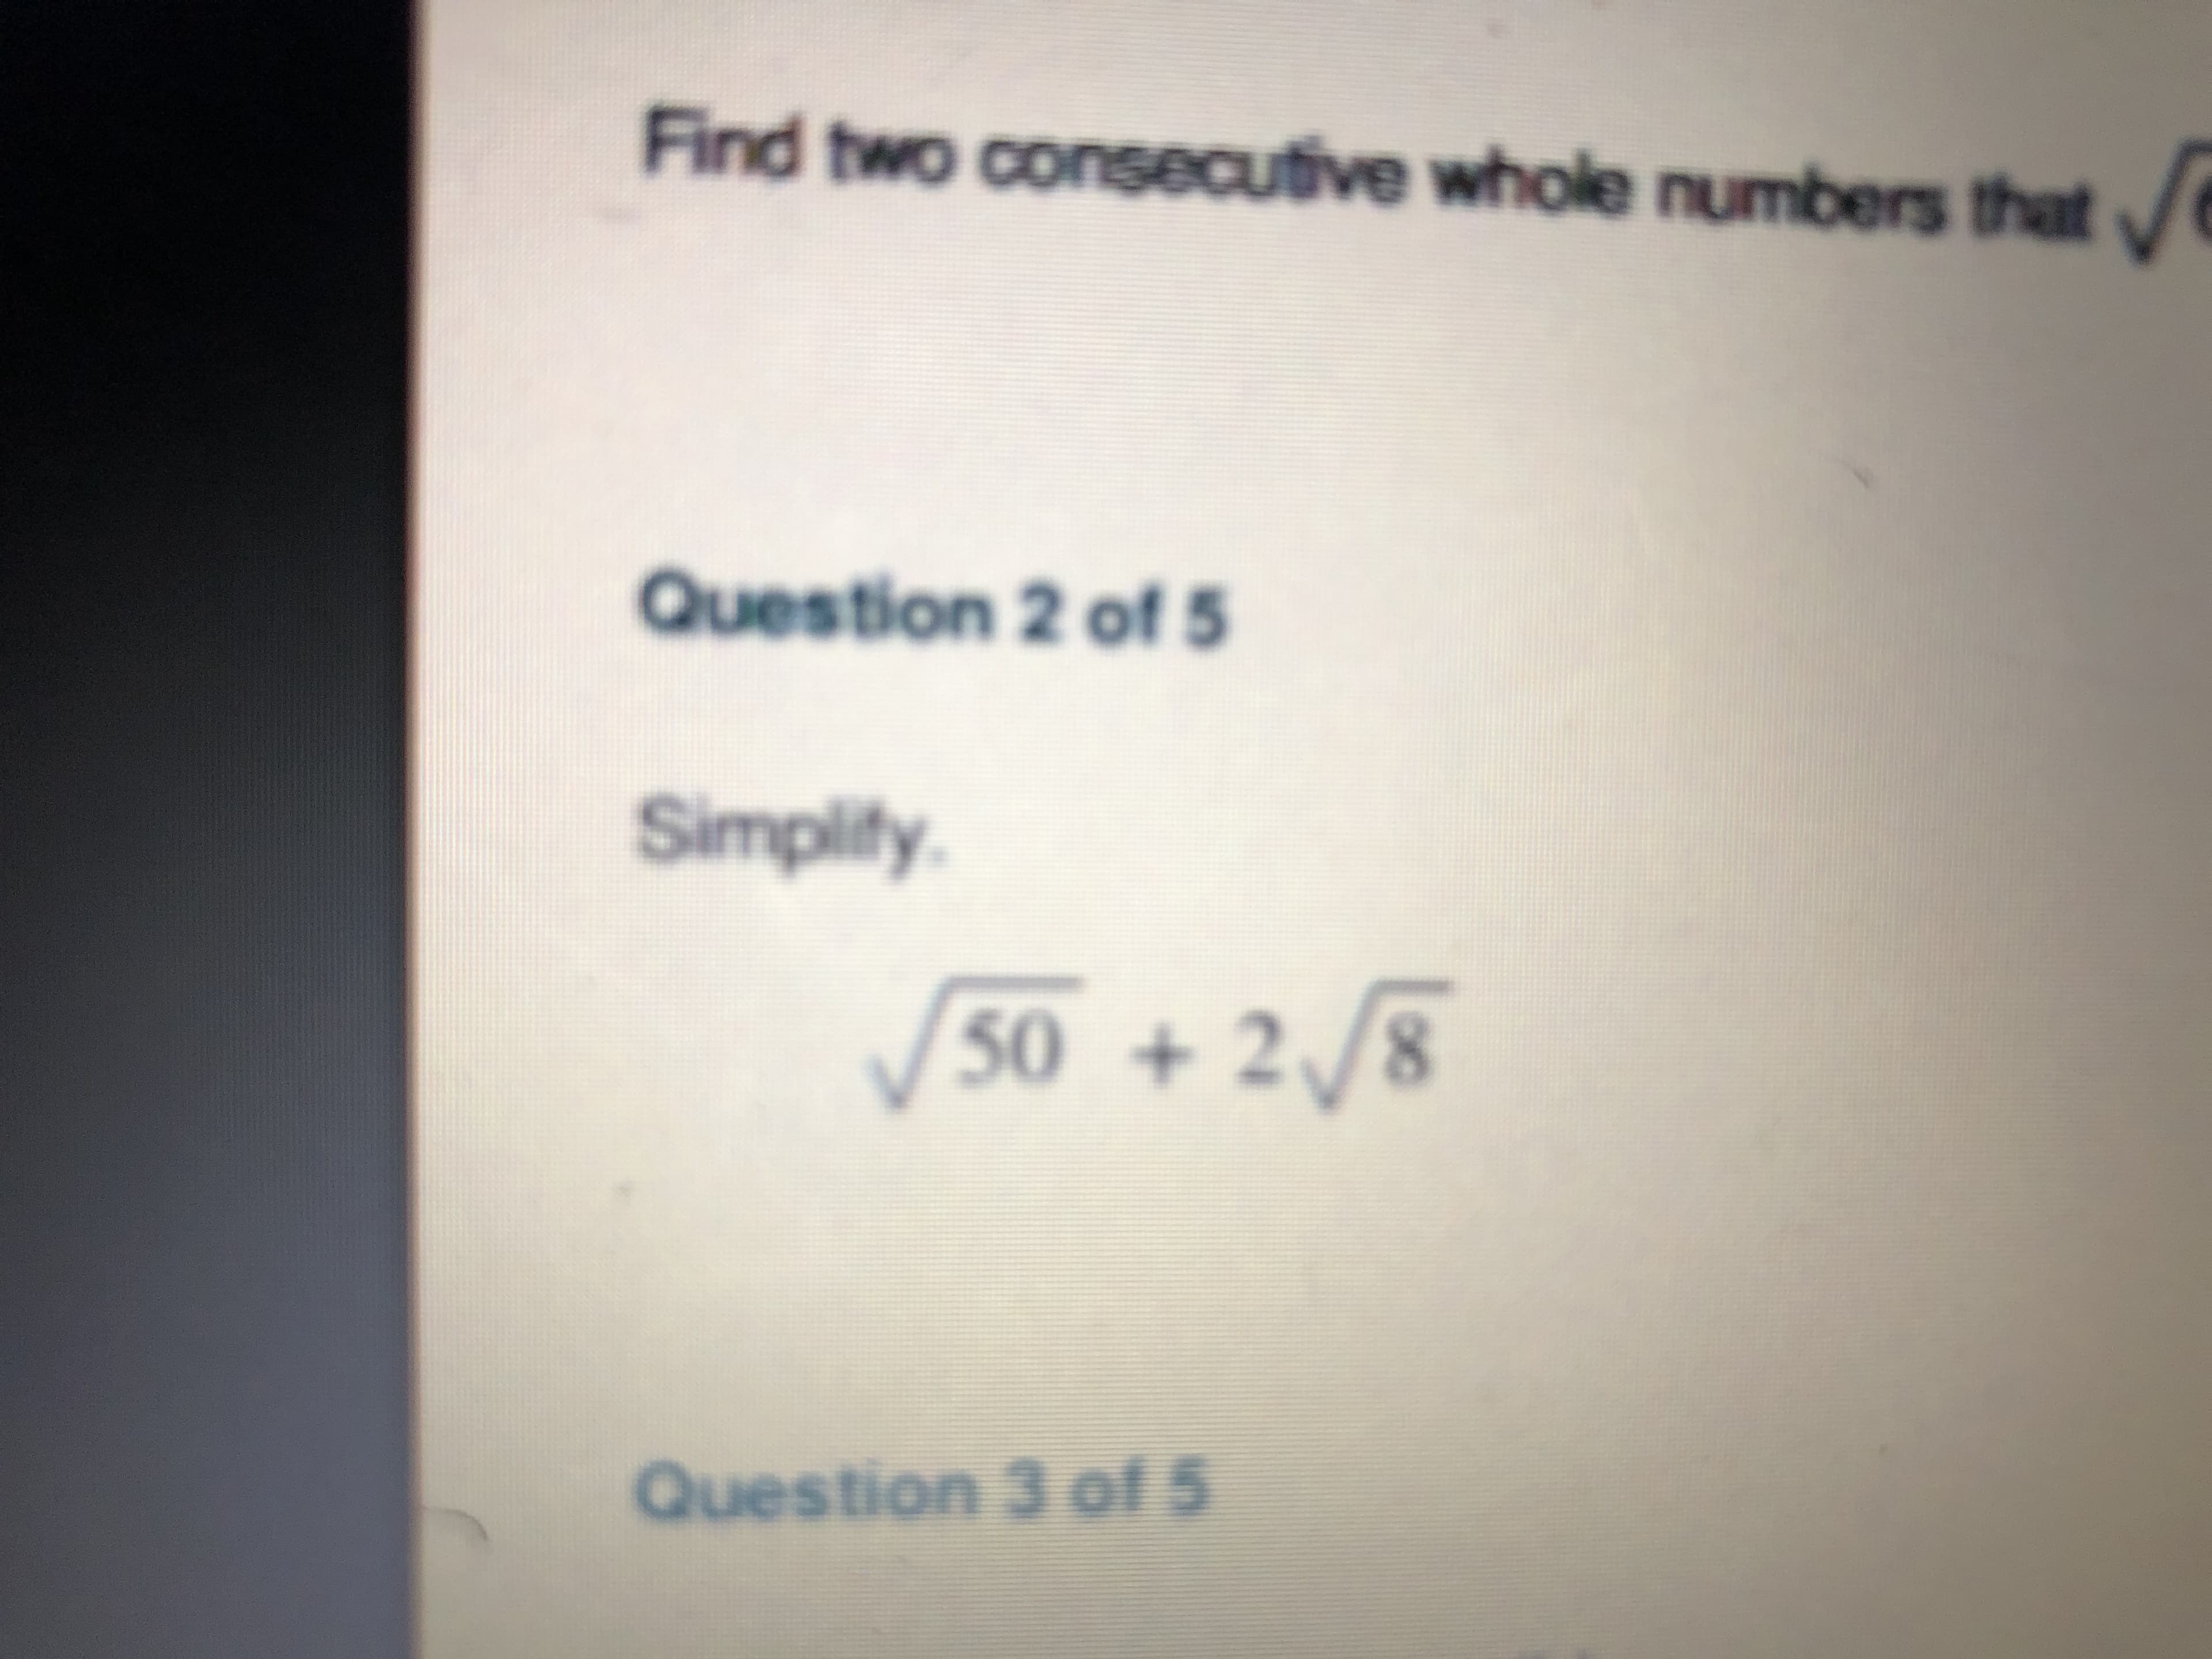 Find two consecutive whole numbers that
Question 2 of 5
Simplify
50 +2/8
Question 3 of
